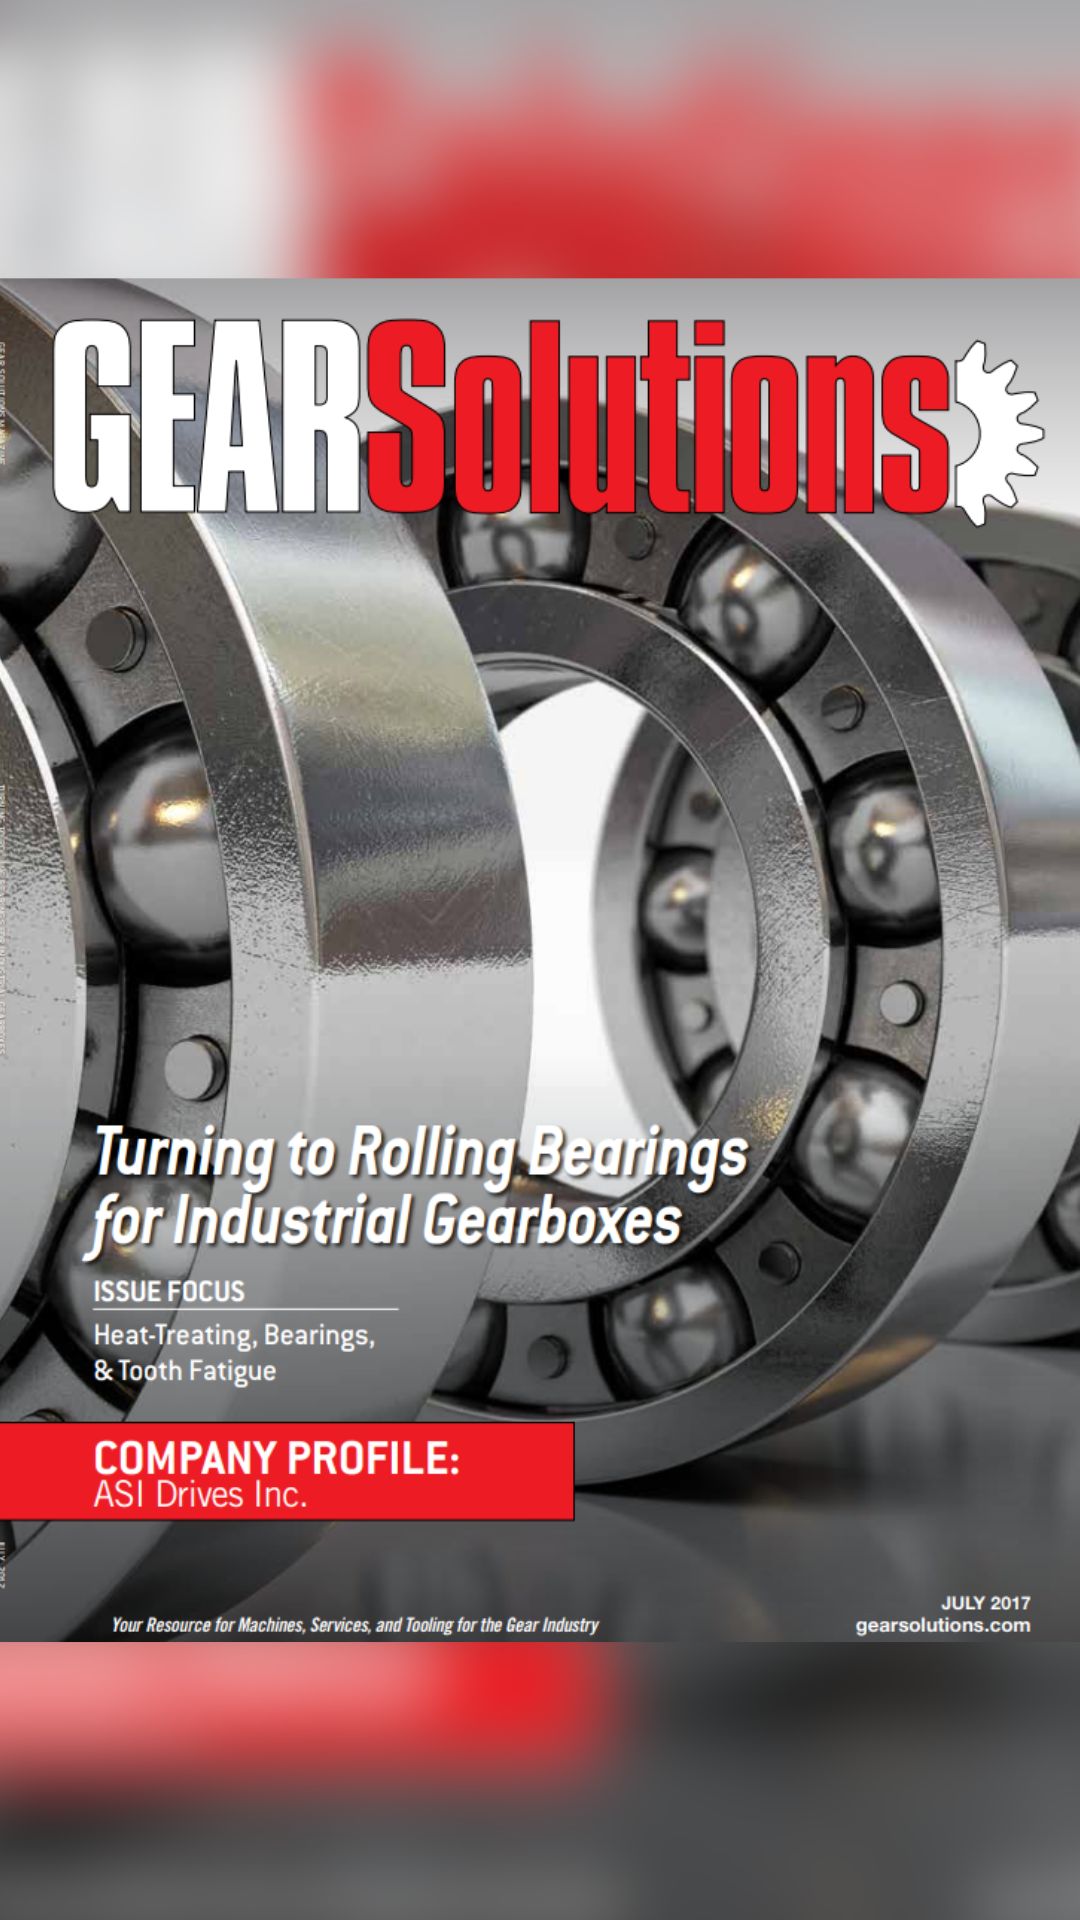 Front cover of Gear Solutions magazine July 2017 'Turning To Rolling Bearings For Industrial Gearboxes'.